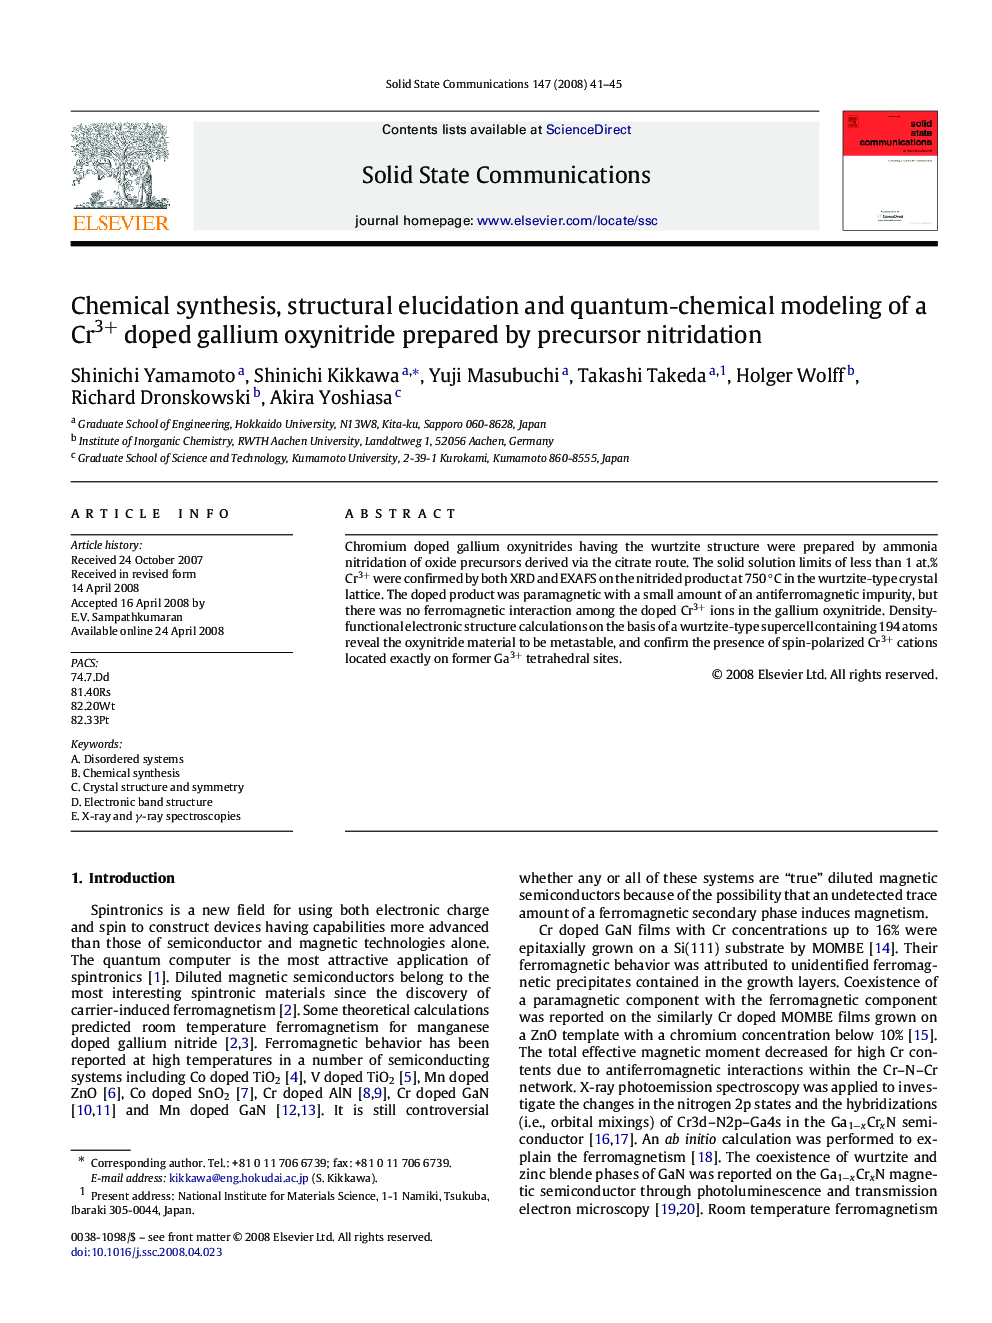 Chemical synthesis, structural elucidation and quantum-chemical modeling of a Cr3+ doped gallium oxynitride prepared by precursor nitridation